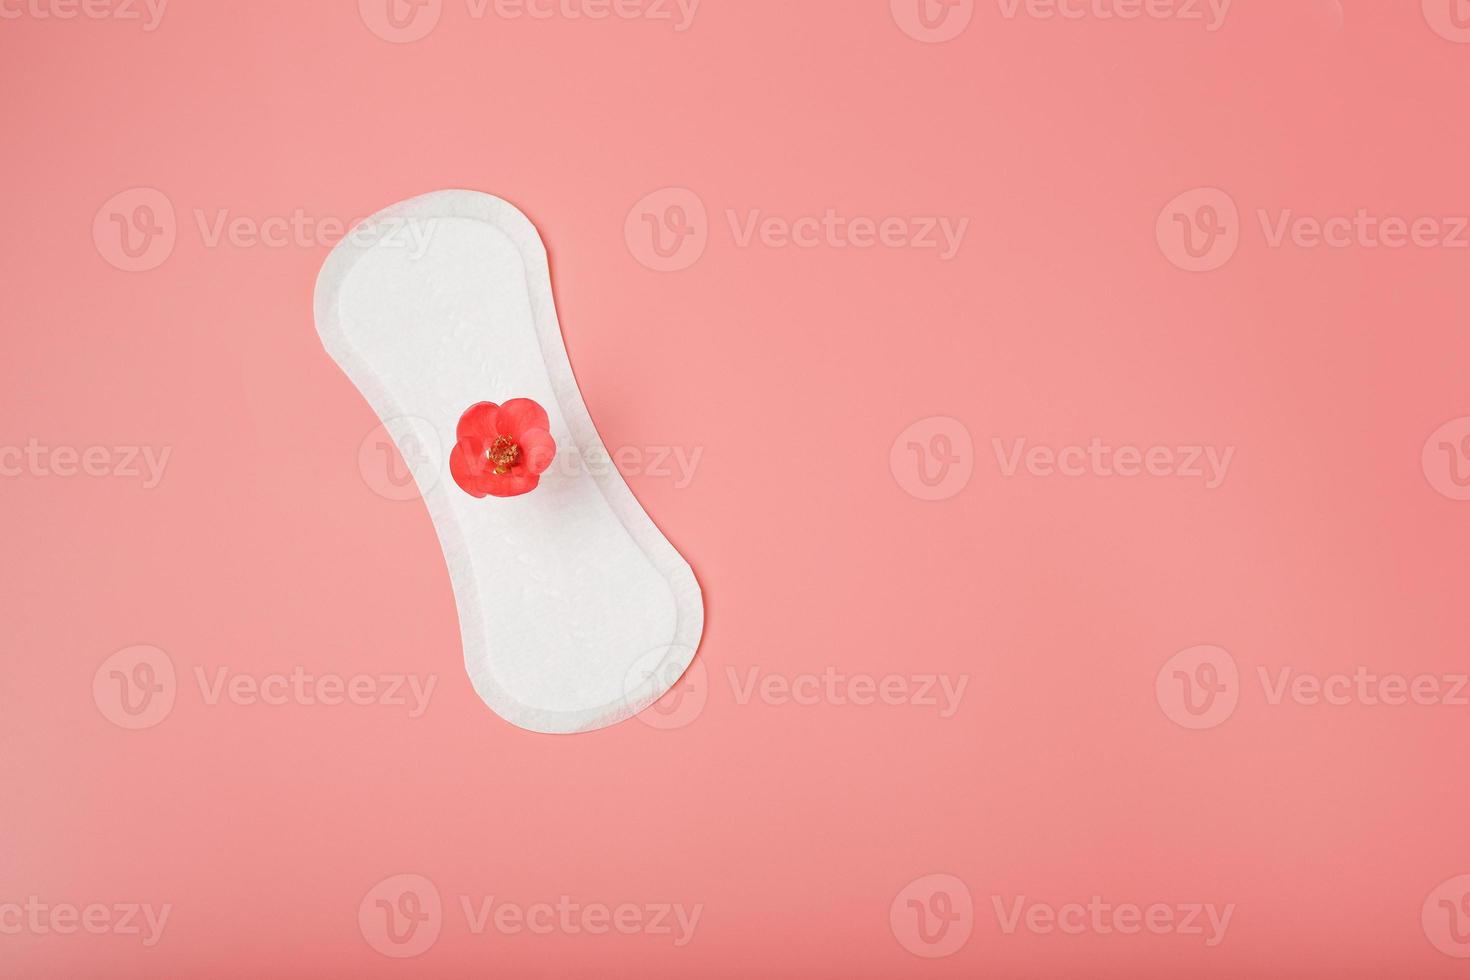 Sanitary pad on a pink background with a red flower. Free space for text. photo